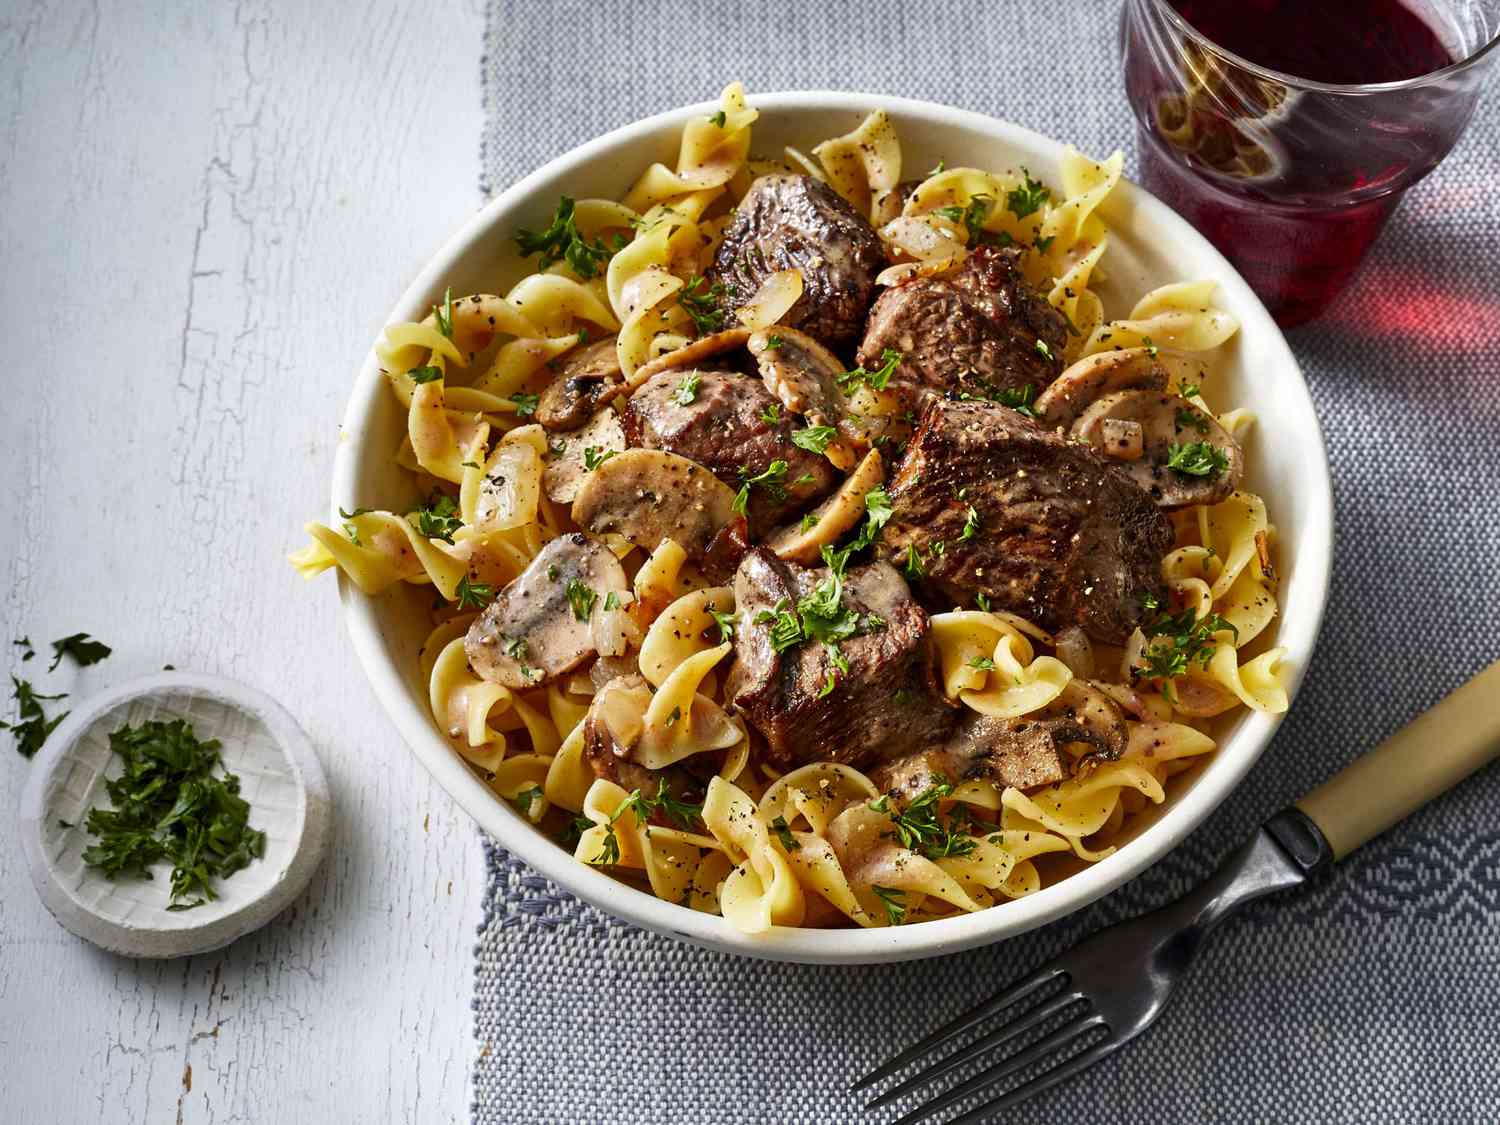 Beef Stroganoff Recipe: Comfort Food Classic with a Touch of Elegance